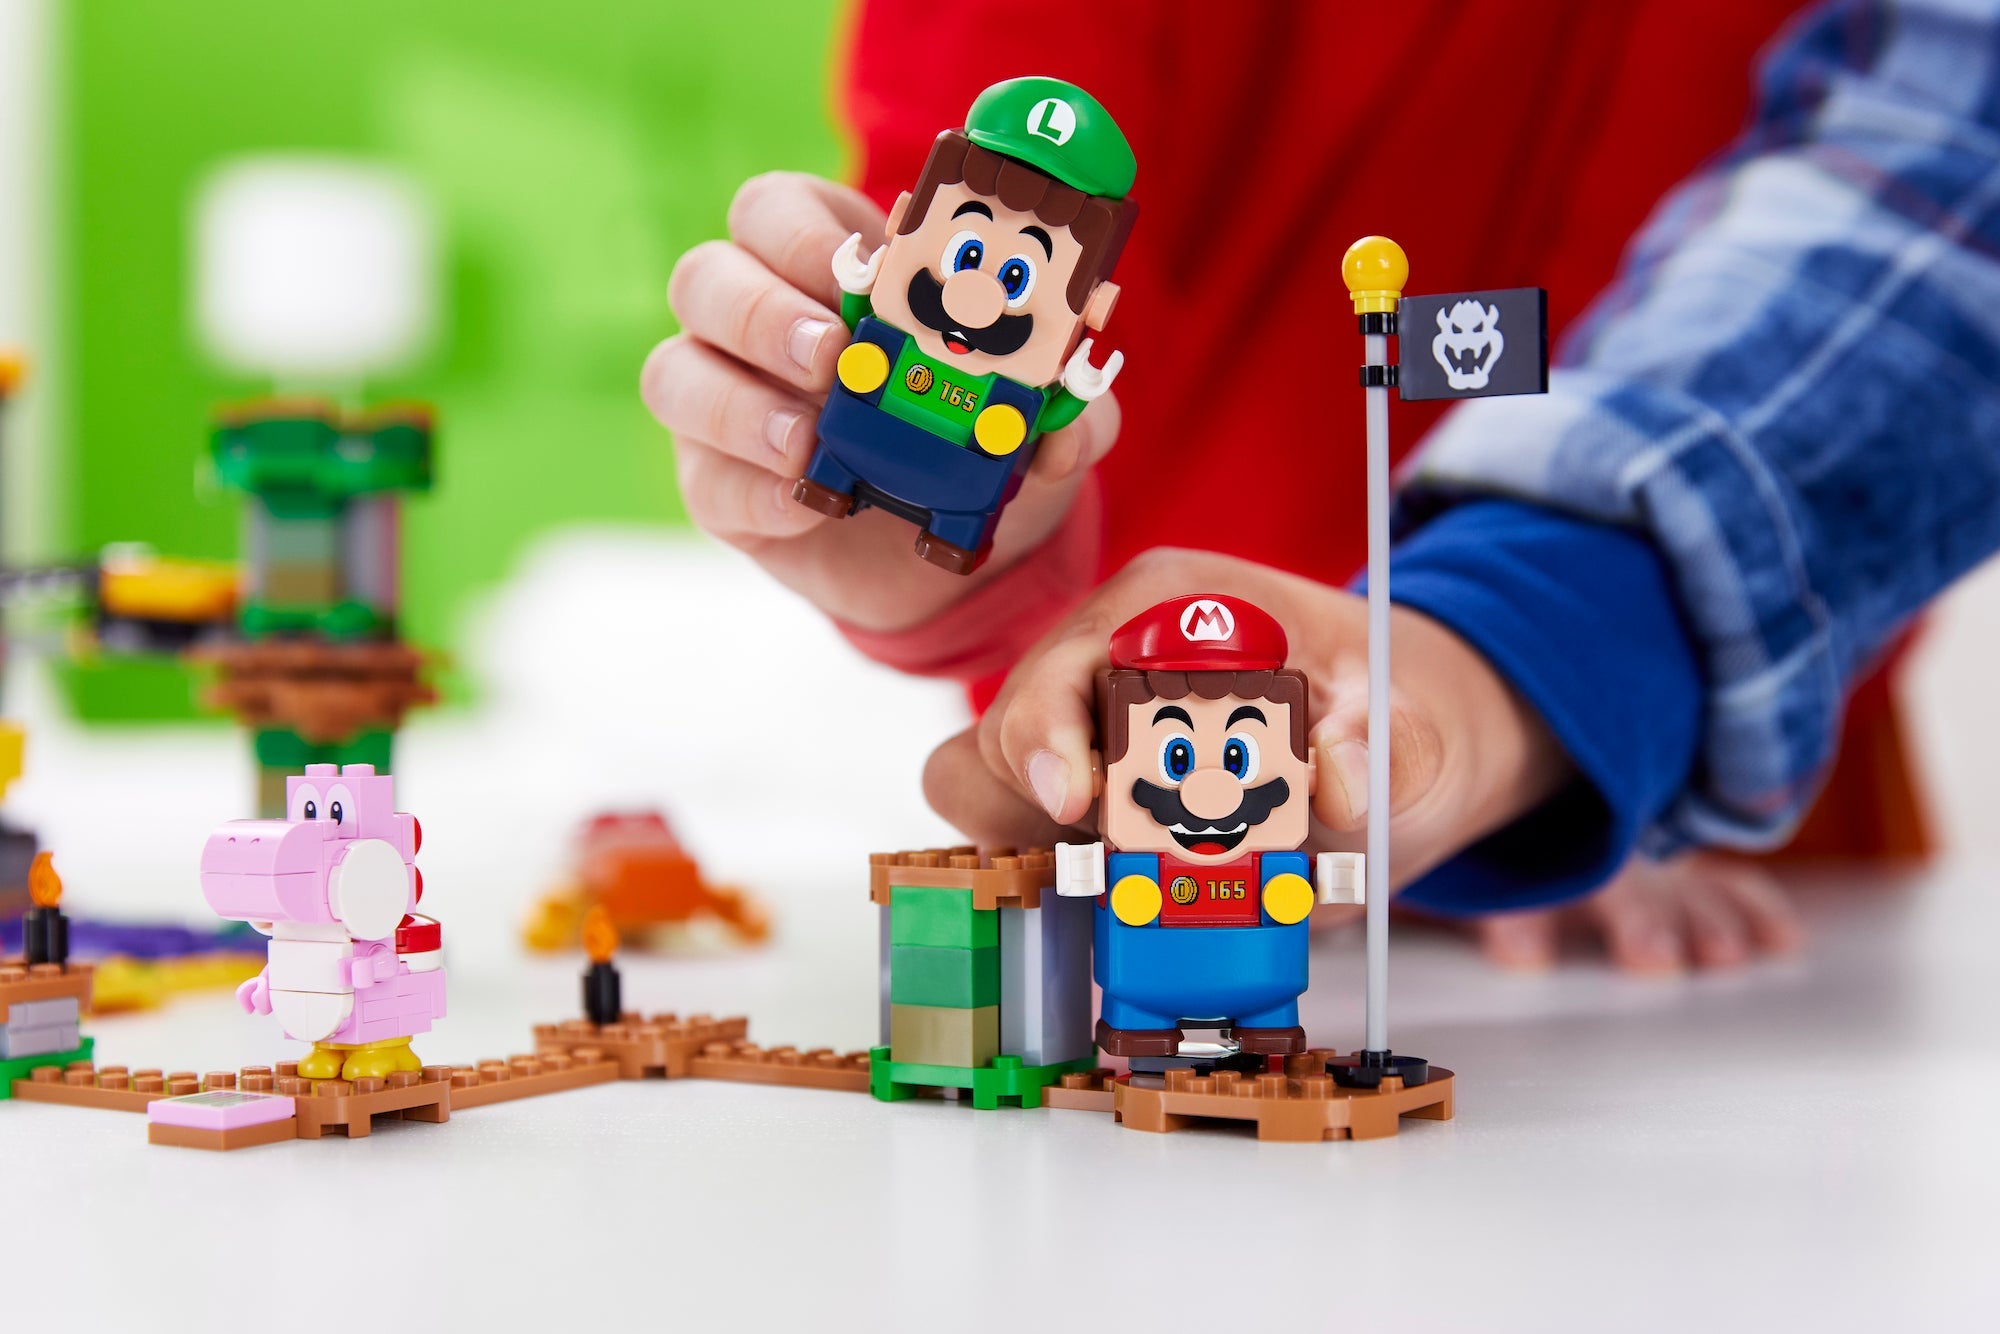 Adding Luigi and multiplayer, Lego finally feels like reaching its potential |